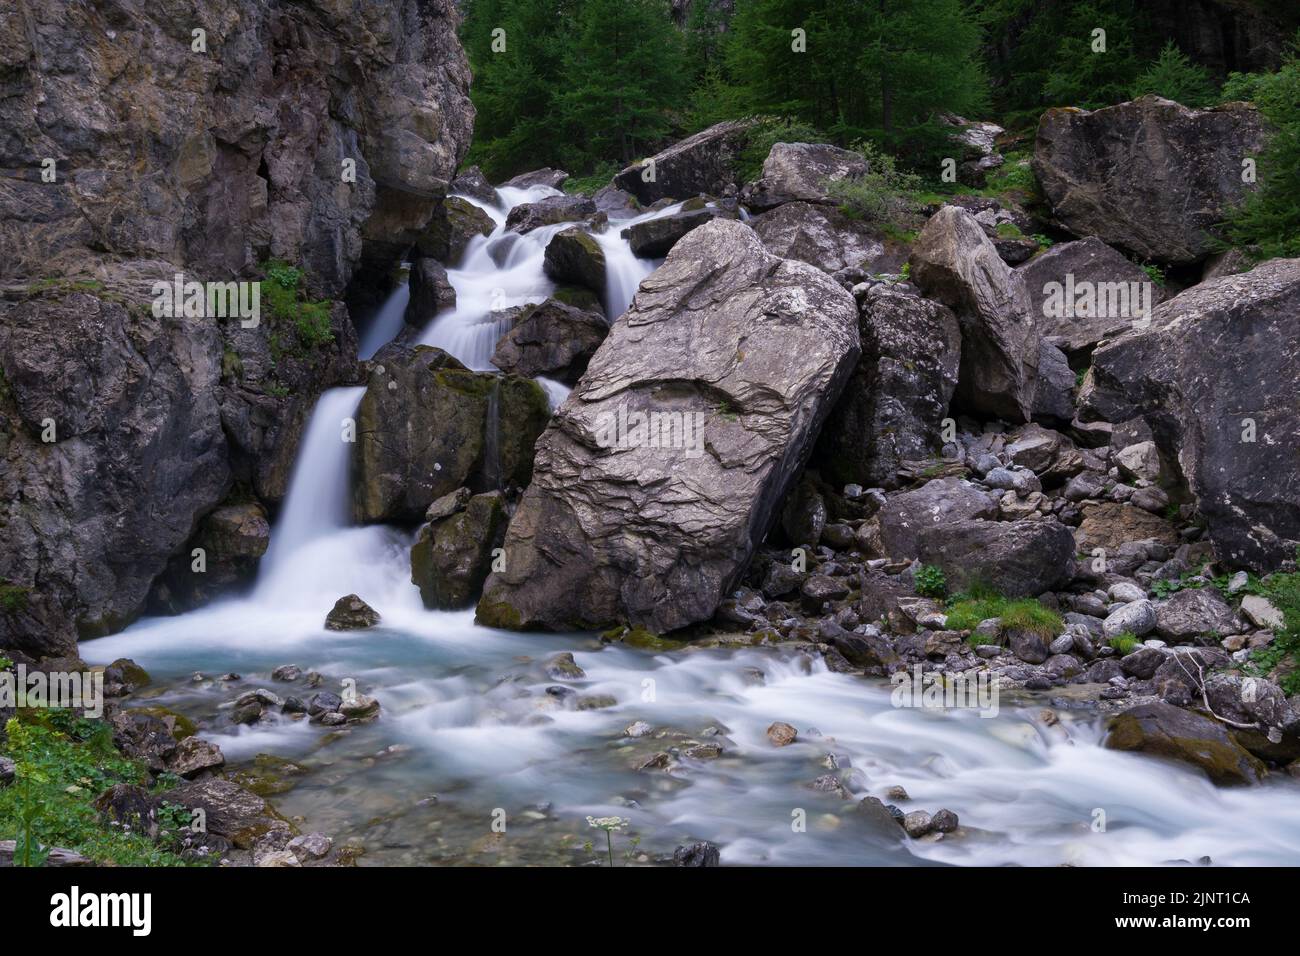 Waterfall in the Romanche river. National Park des Écrins in the French Alpes. Stock Photo